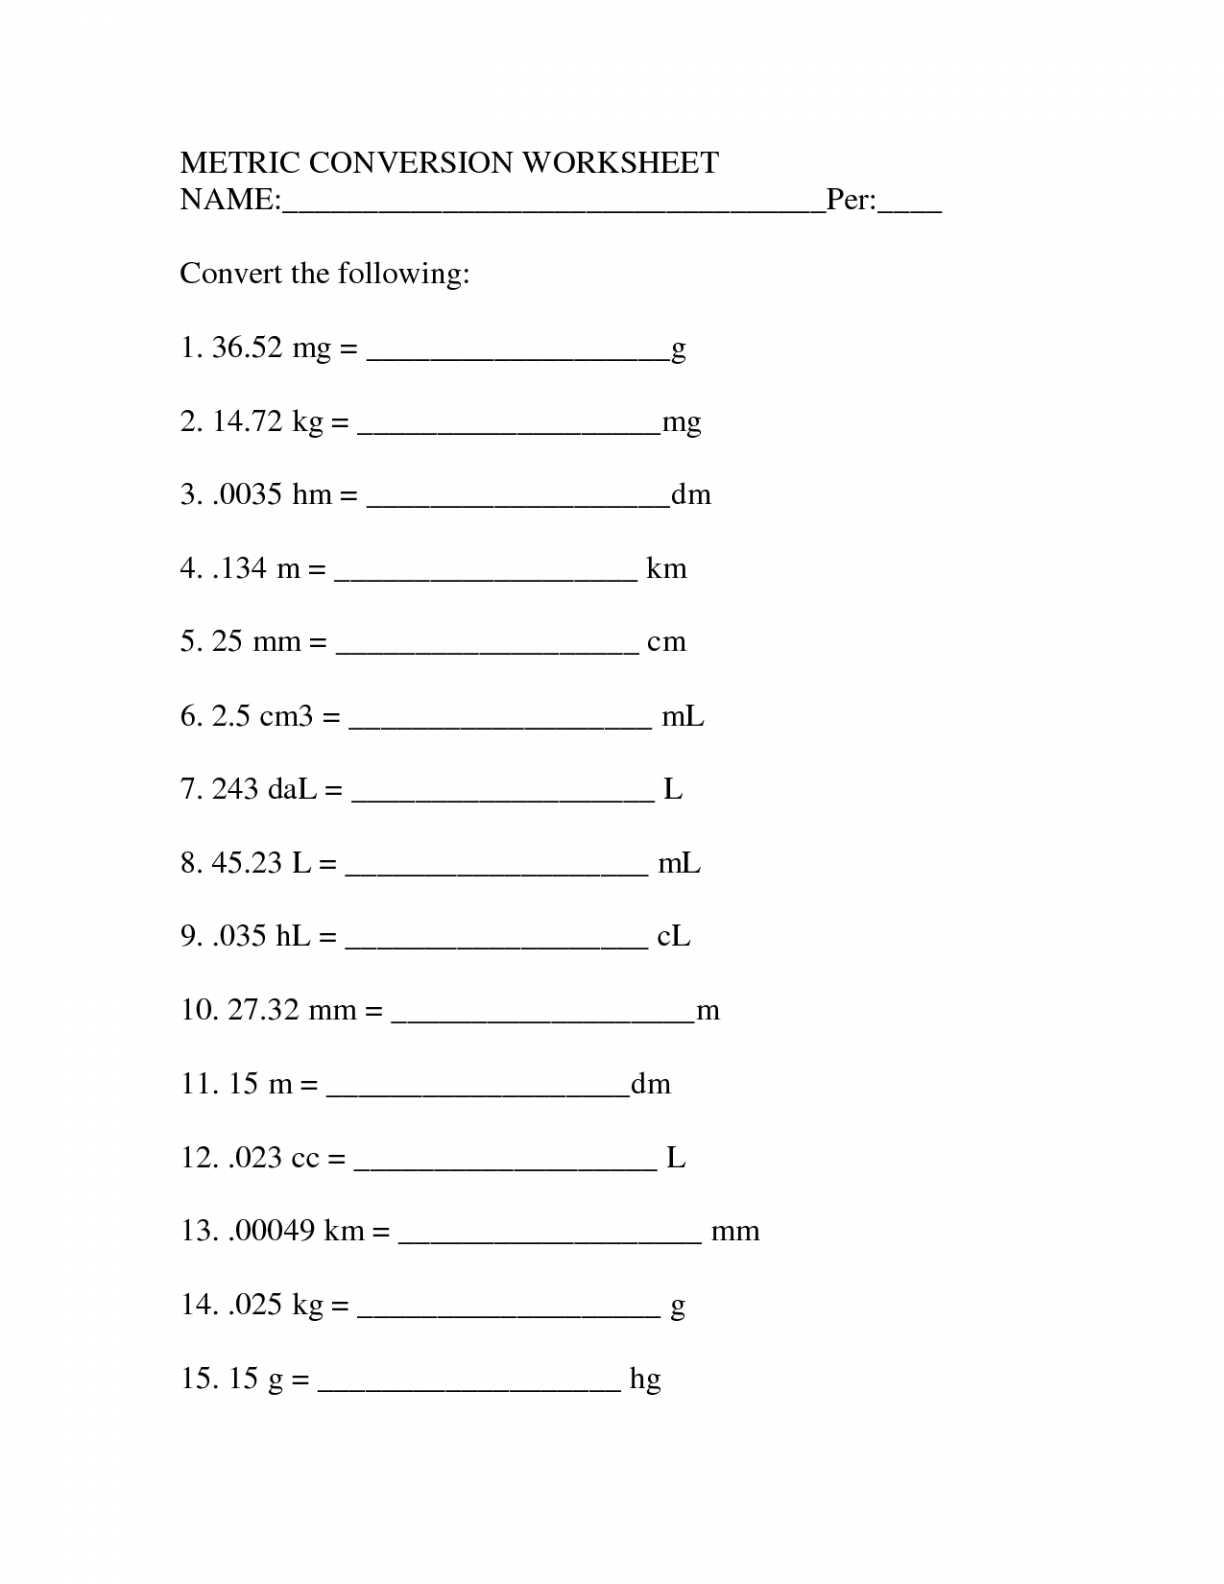 Unit Conversion Worksheet Pdf together with Math Worksheets Converting Unites Worksheet the Metric Conversion